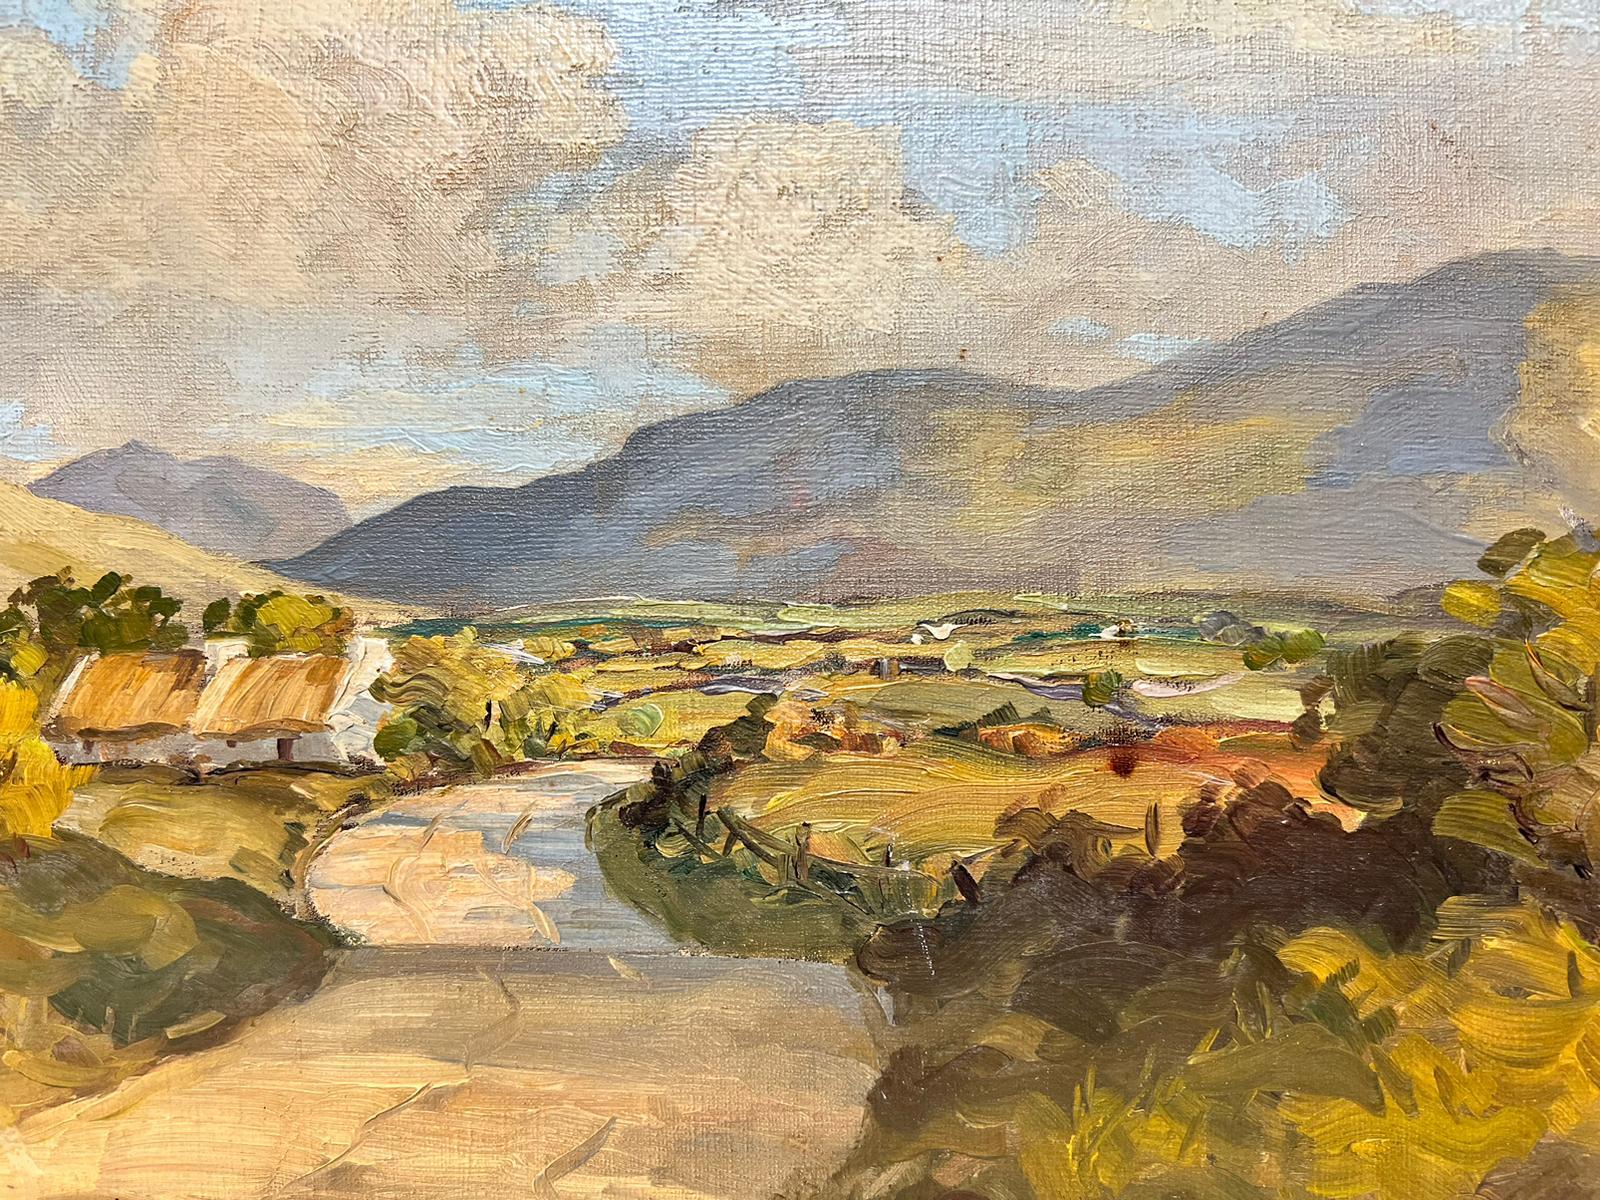 Irish School, second half 20th century, 
signed H.J Foy
Mourne Mountains (County Down, Ireland) between Hilltown & Newcastle - inscribed verso
oil on board, framed
11 x 18 inches
9.5 x 16 inches
private collection, UK
the painting is in overall very